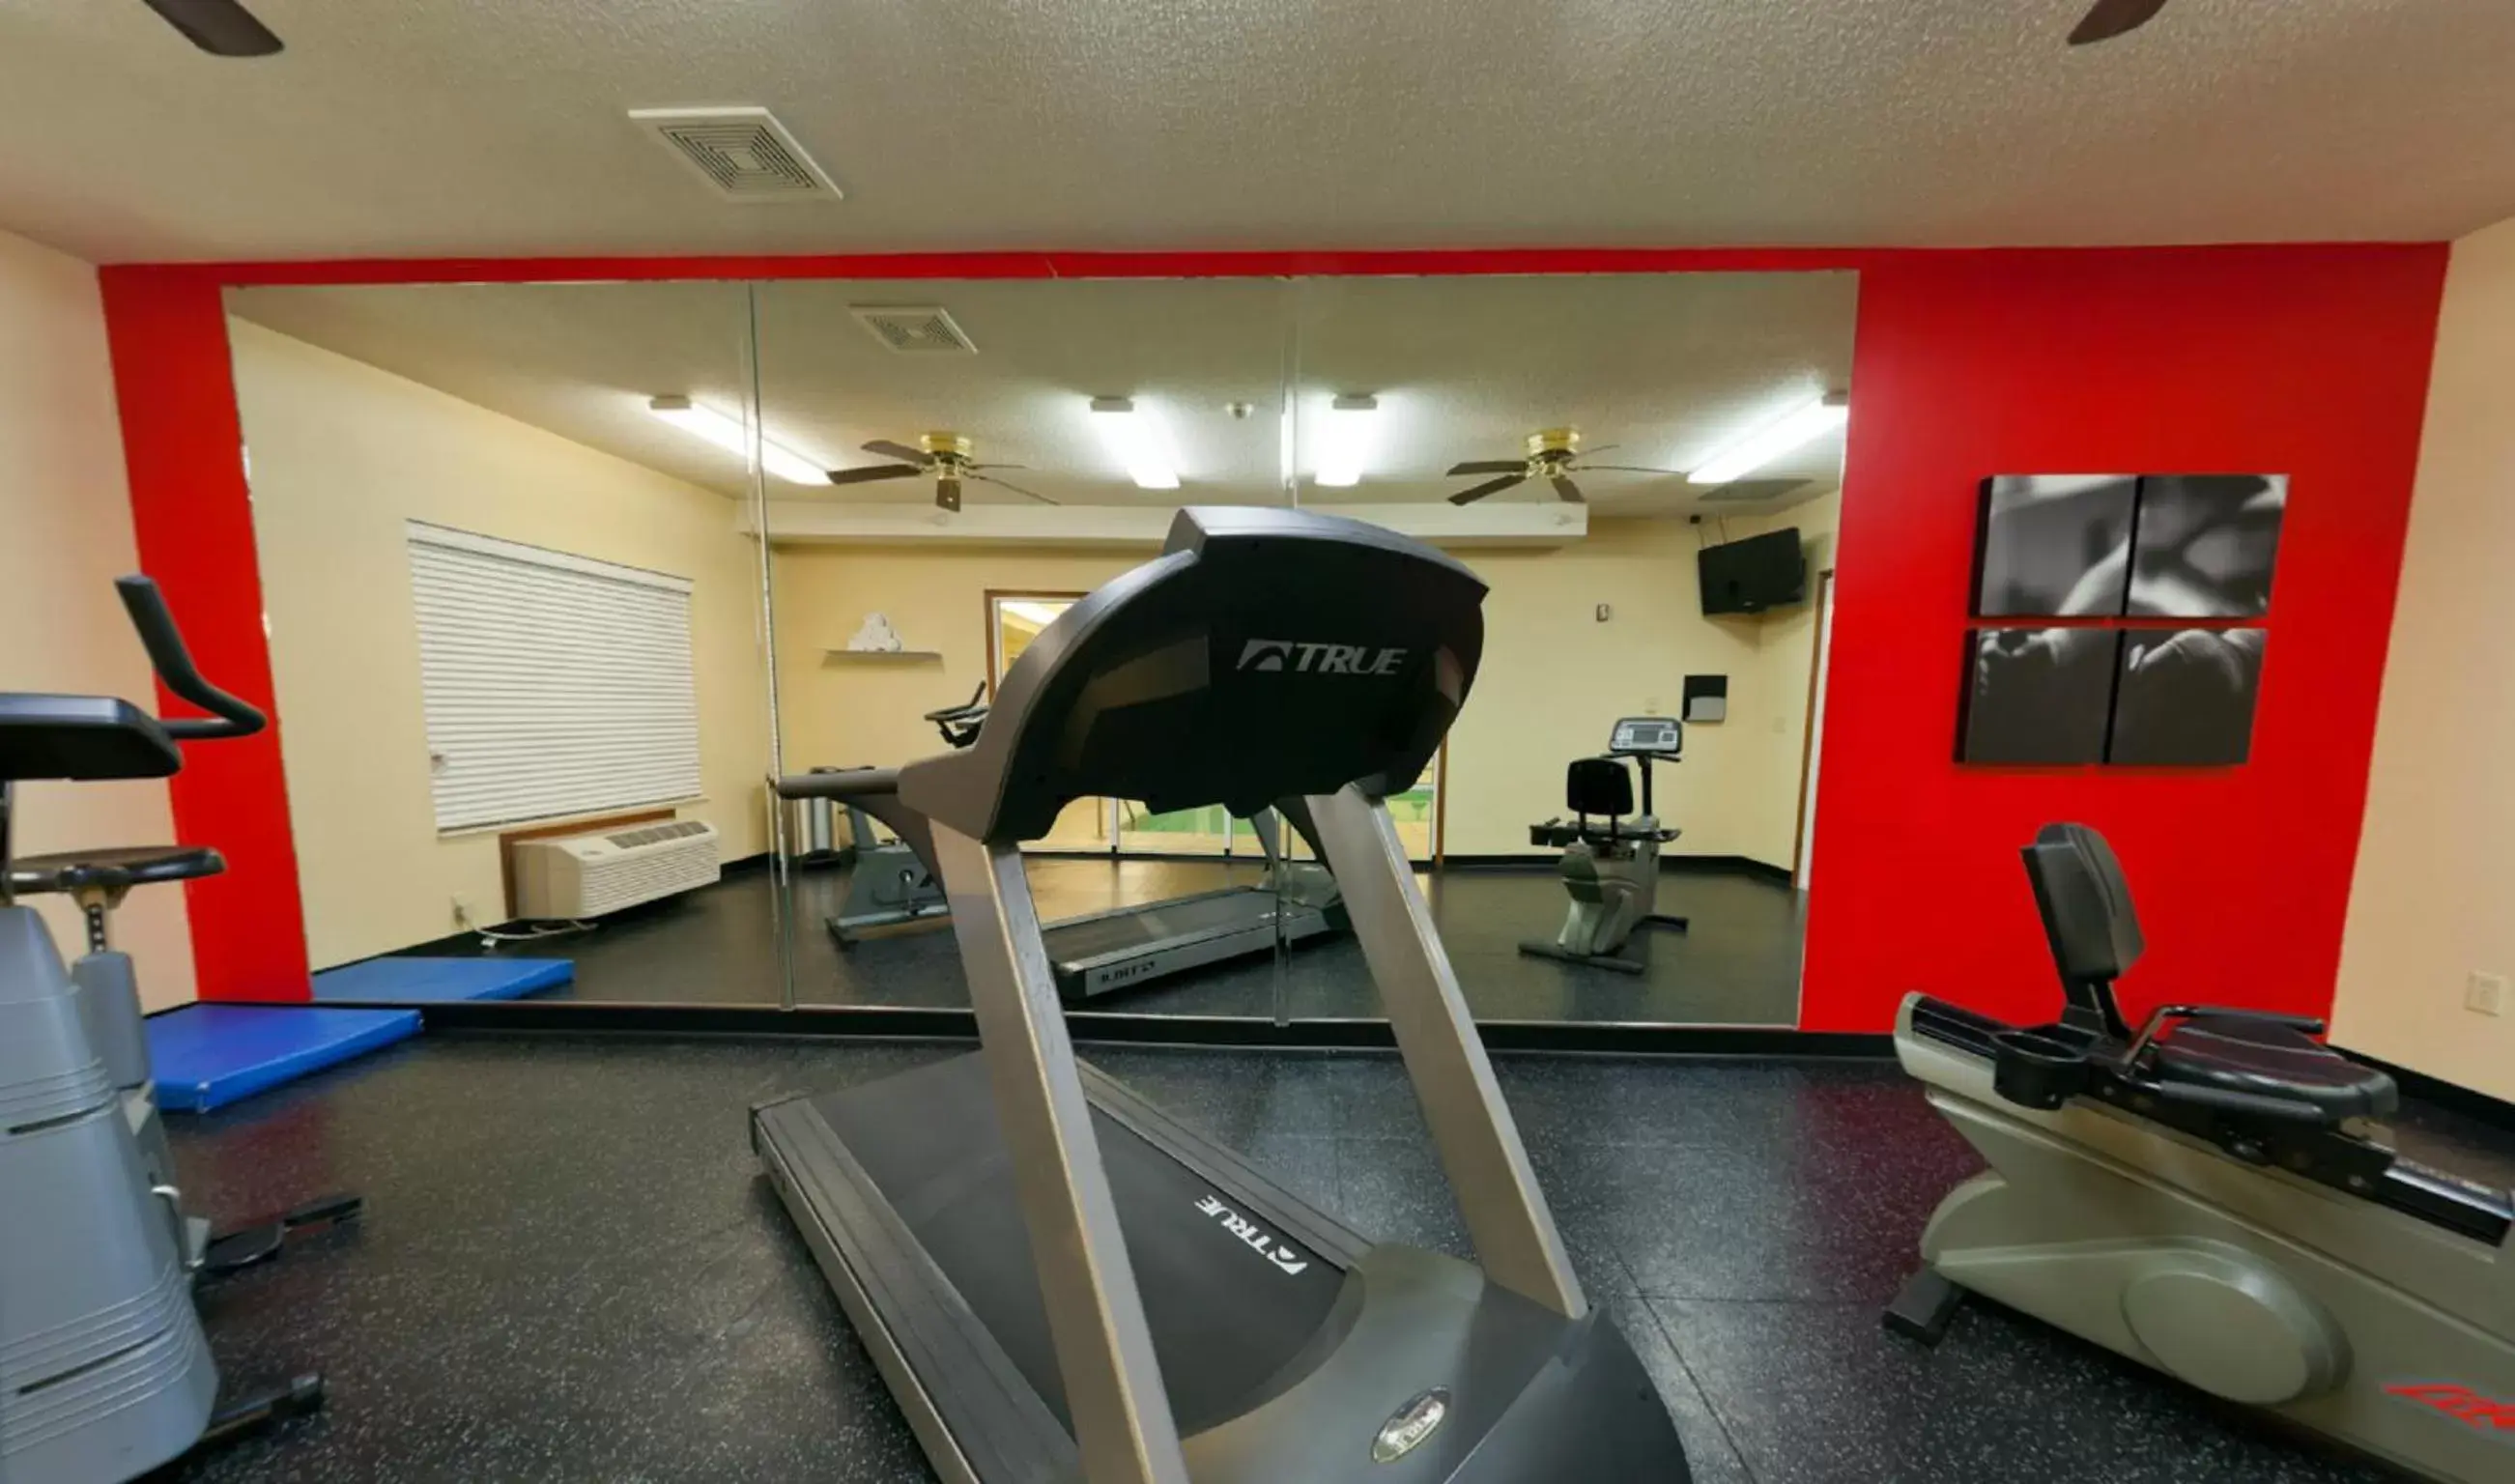 Fitness centre/facilities, Fitness Center/Facilities in AmericInn by Wyndham, Galesburg, IL